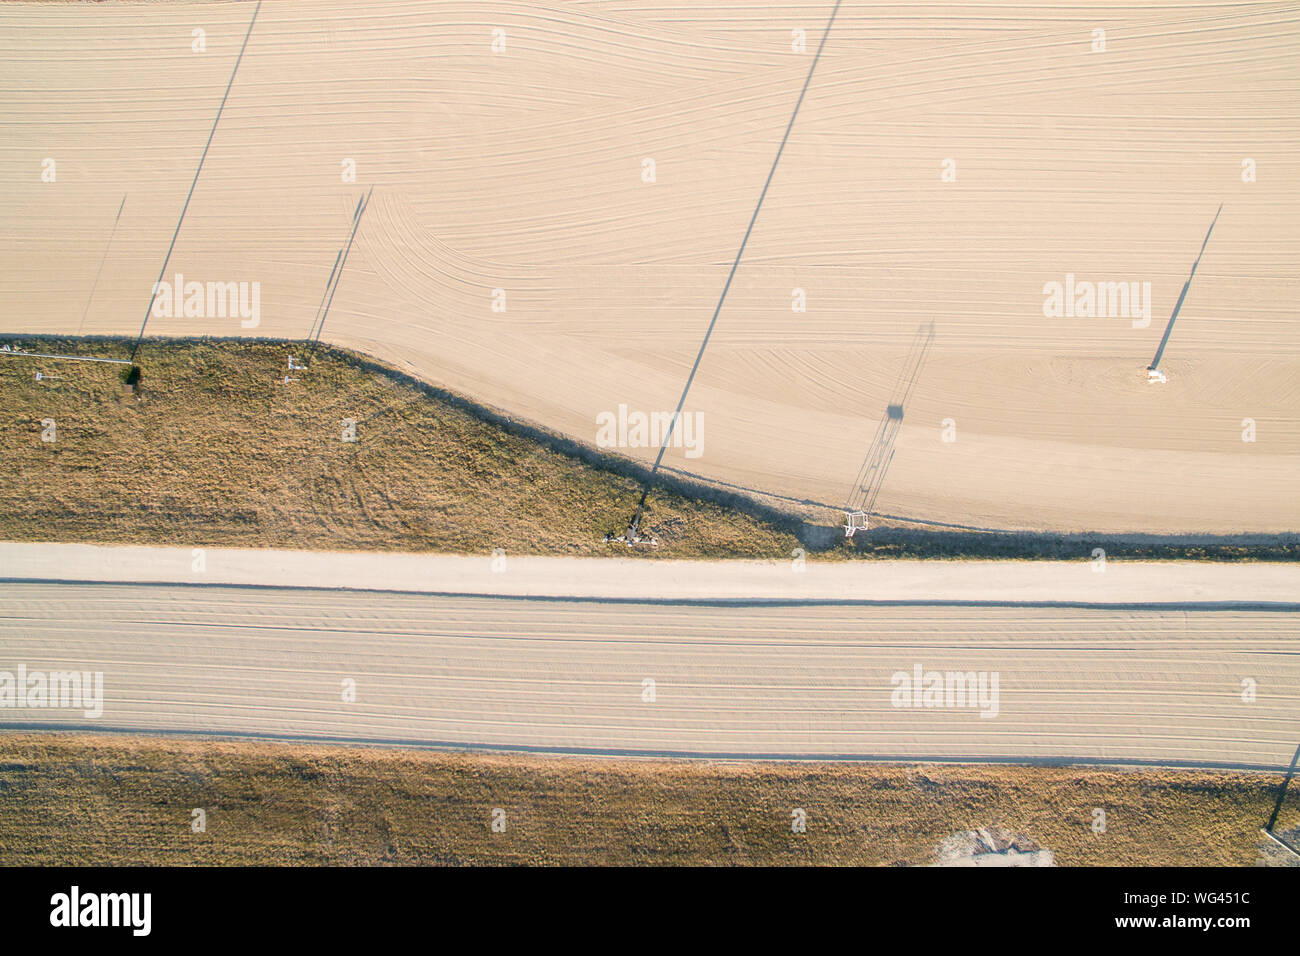 Aerial View Of Horseracing Track On Sunny Day Stock Photo